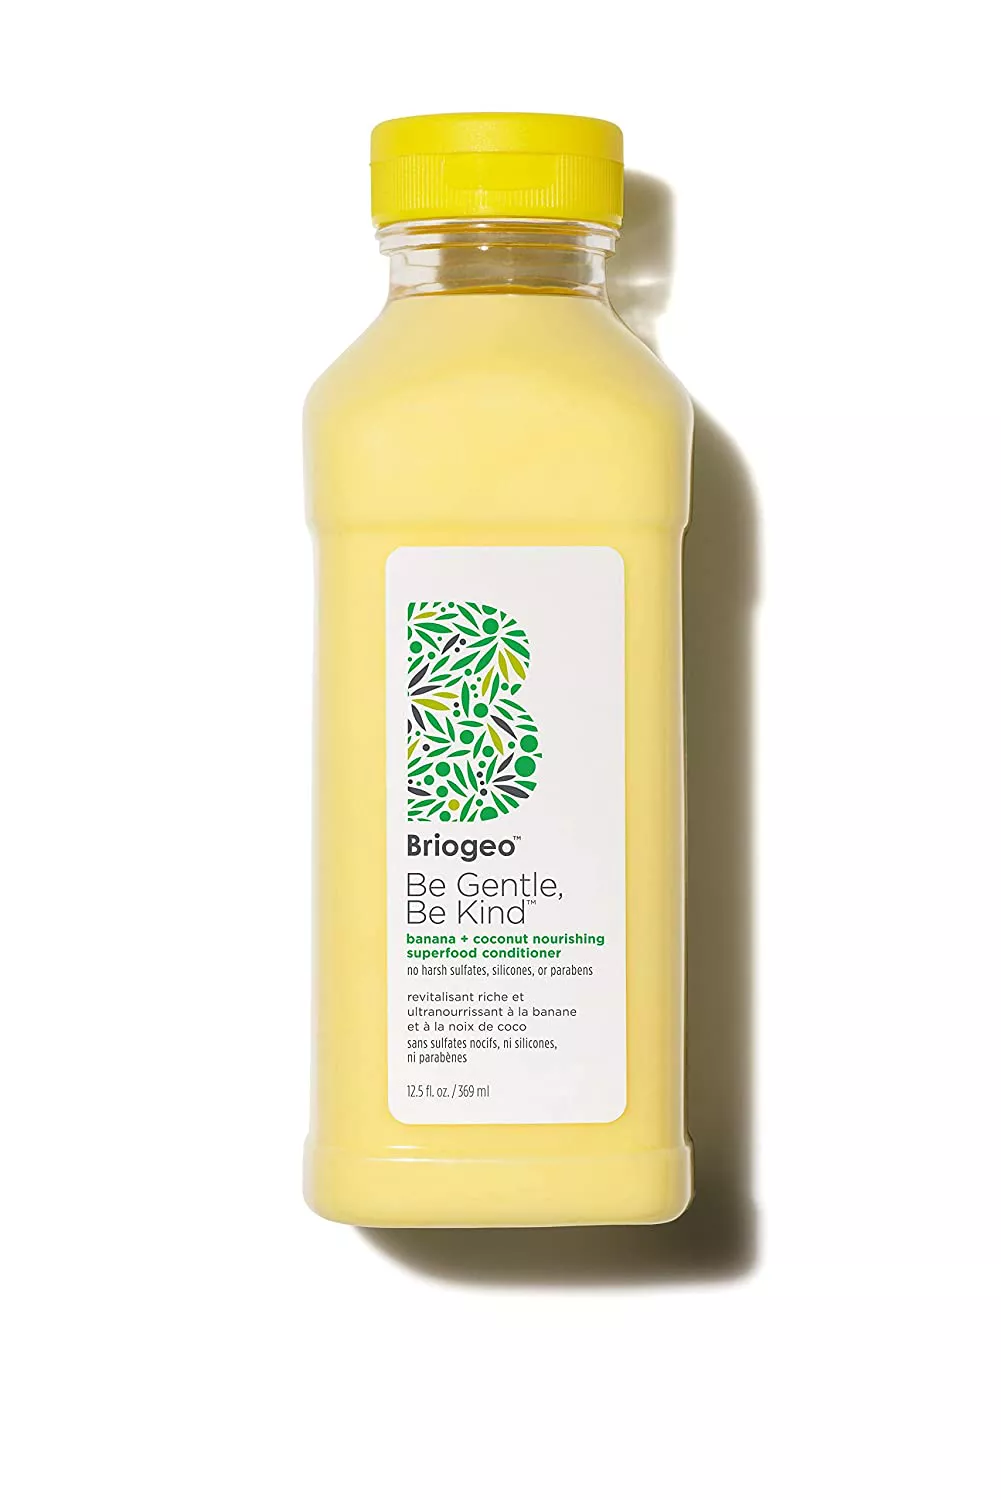 Be Gentle, Be Kind Banana + Coconut Nourishing Superfood Conditioner is